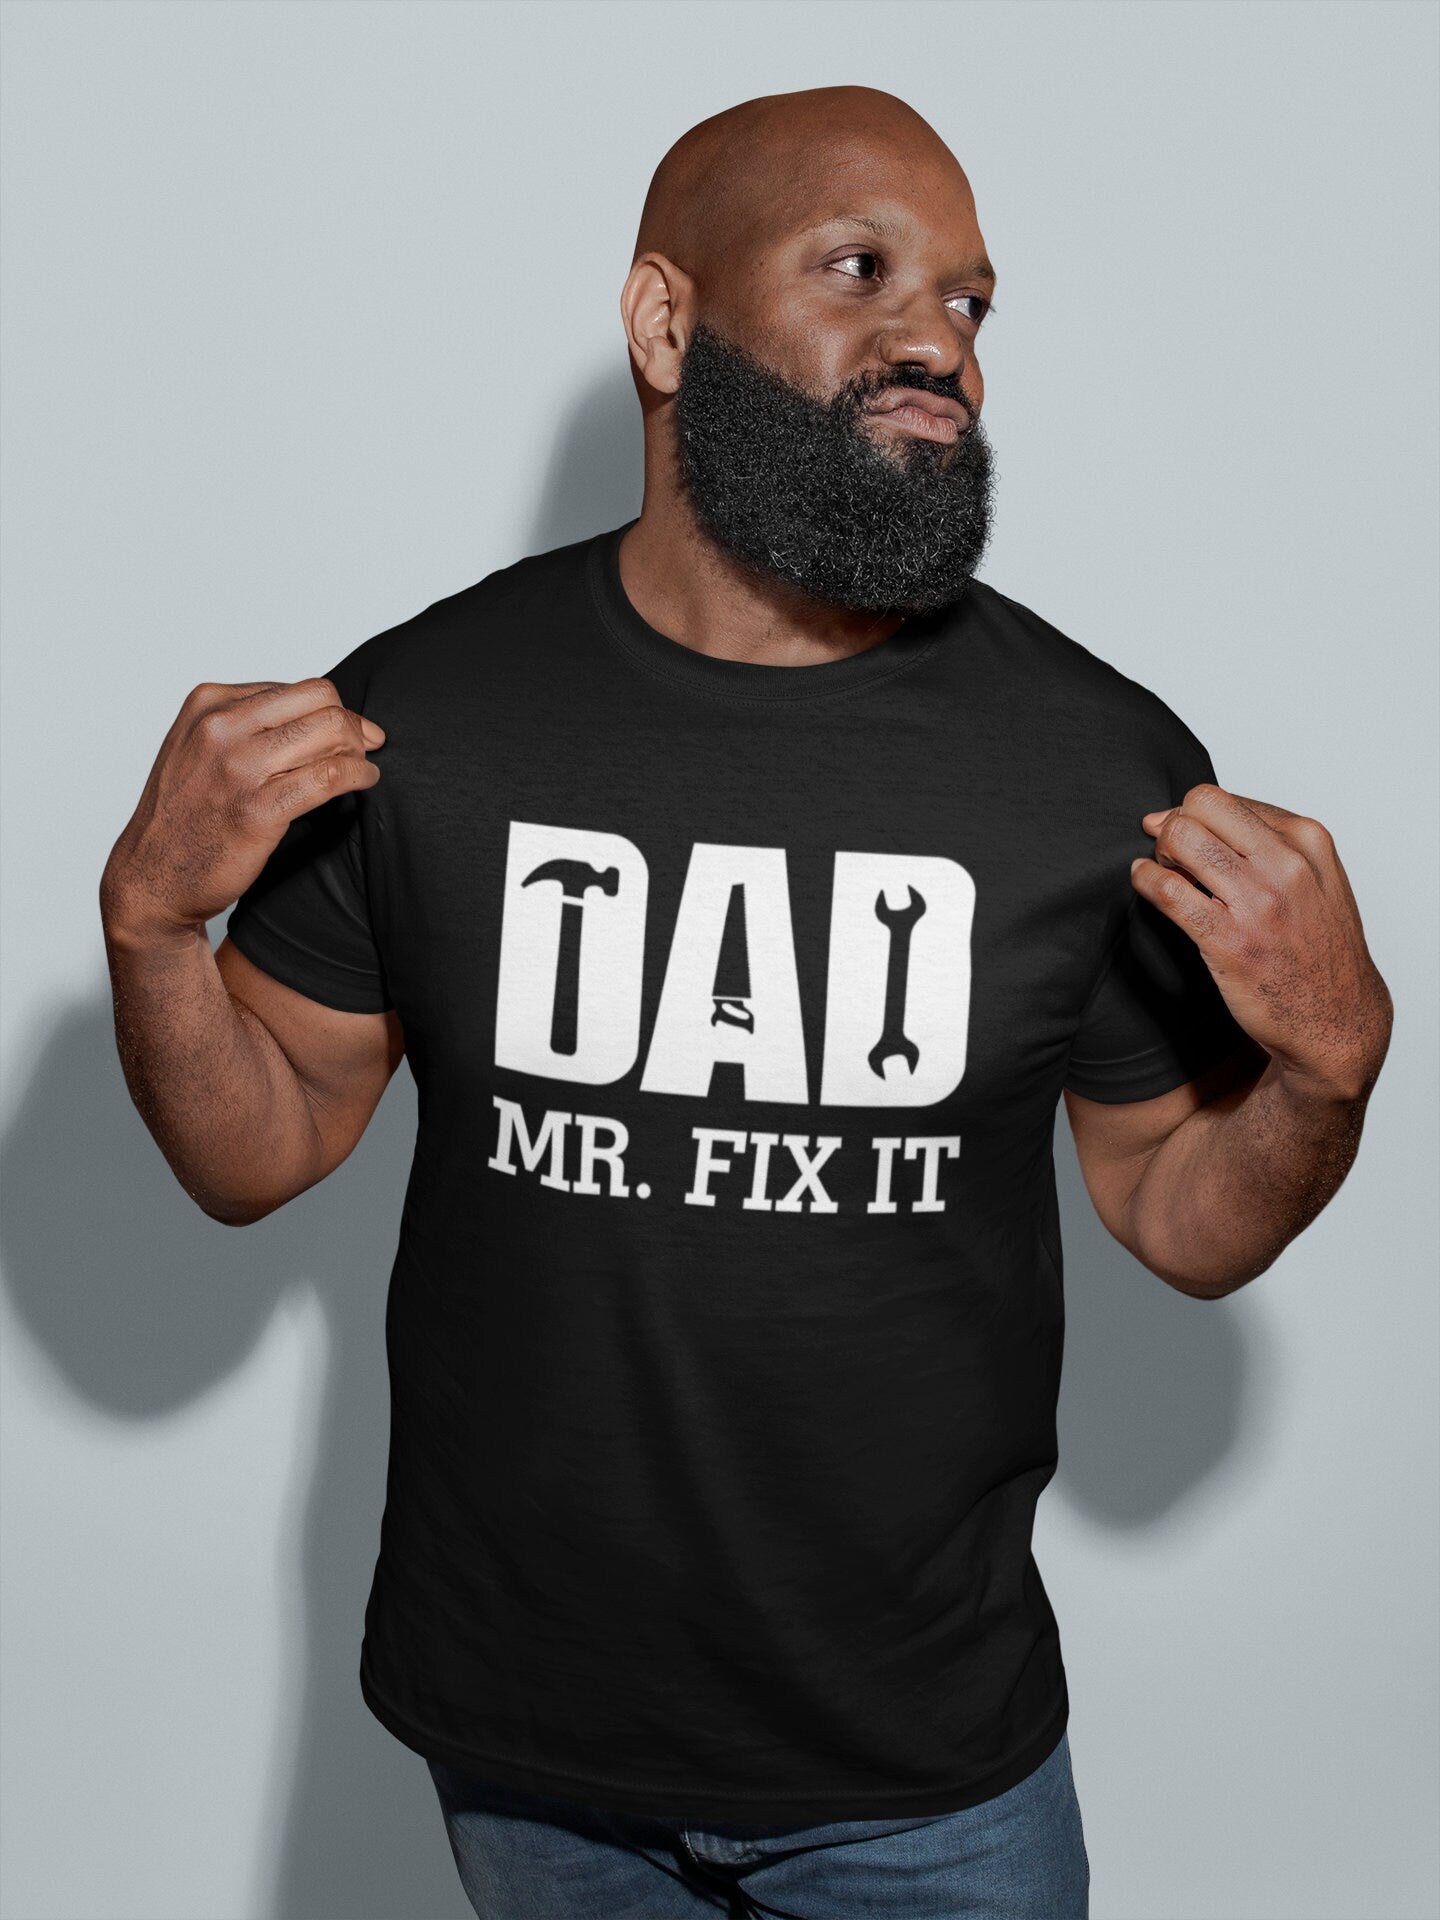 Mr. Fix It Father's Day shirt